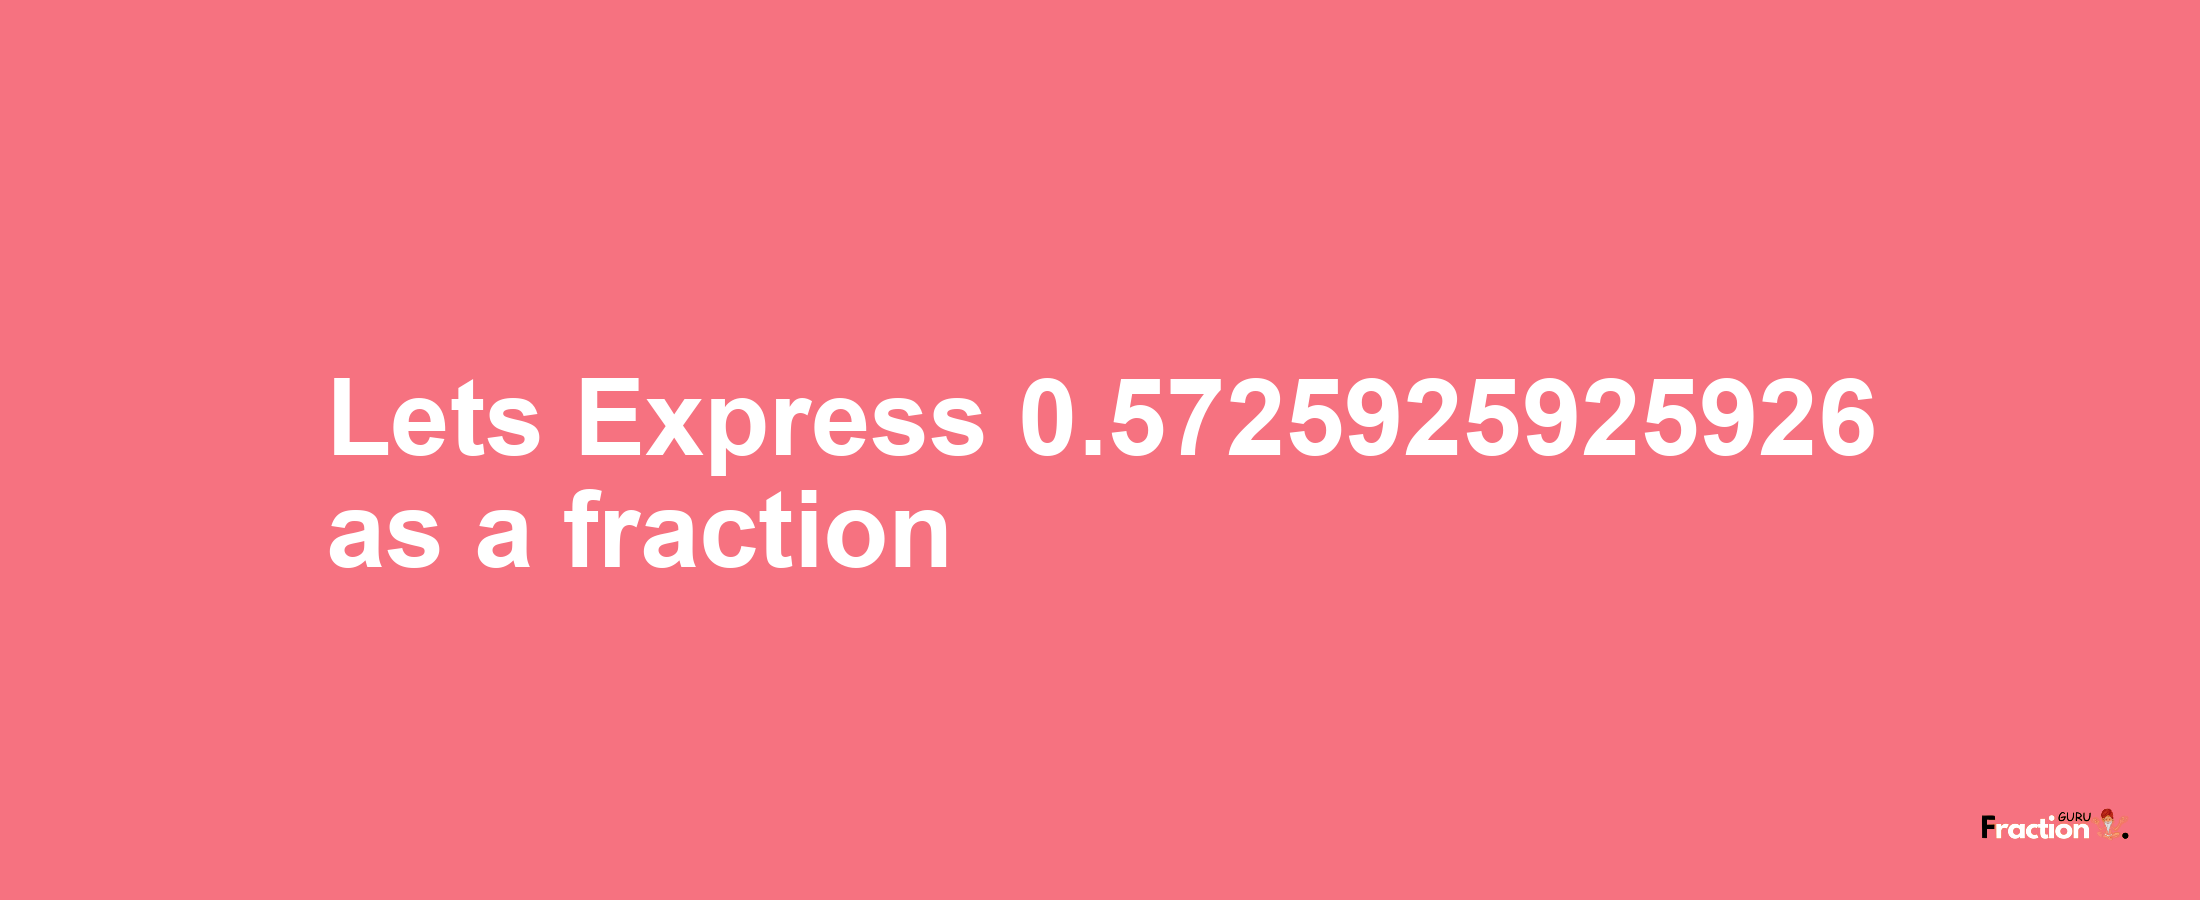 Lets Express 0.5725925925926 as afraction